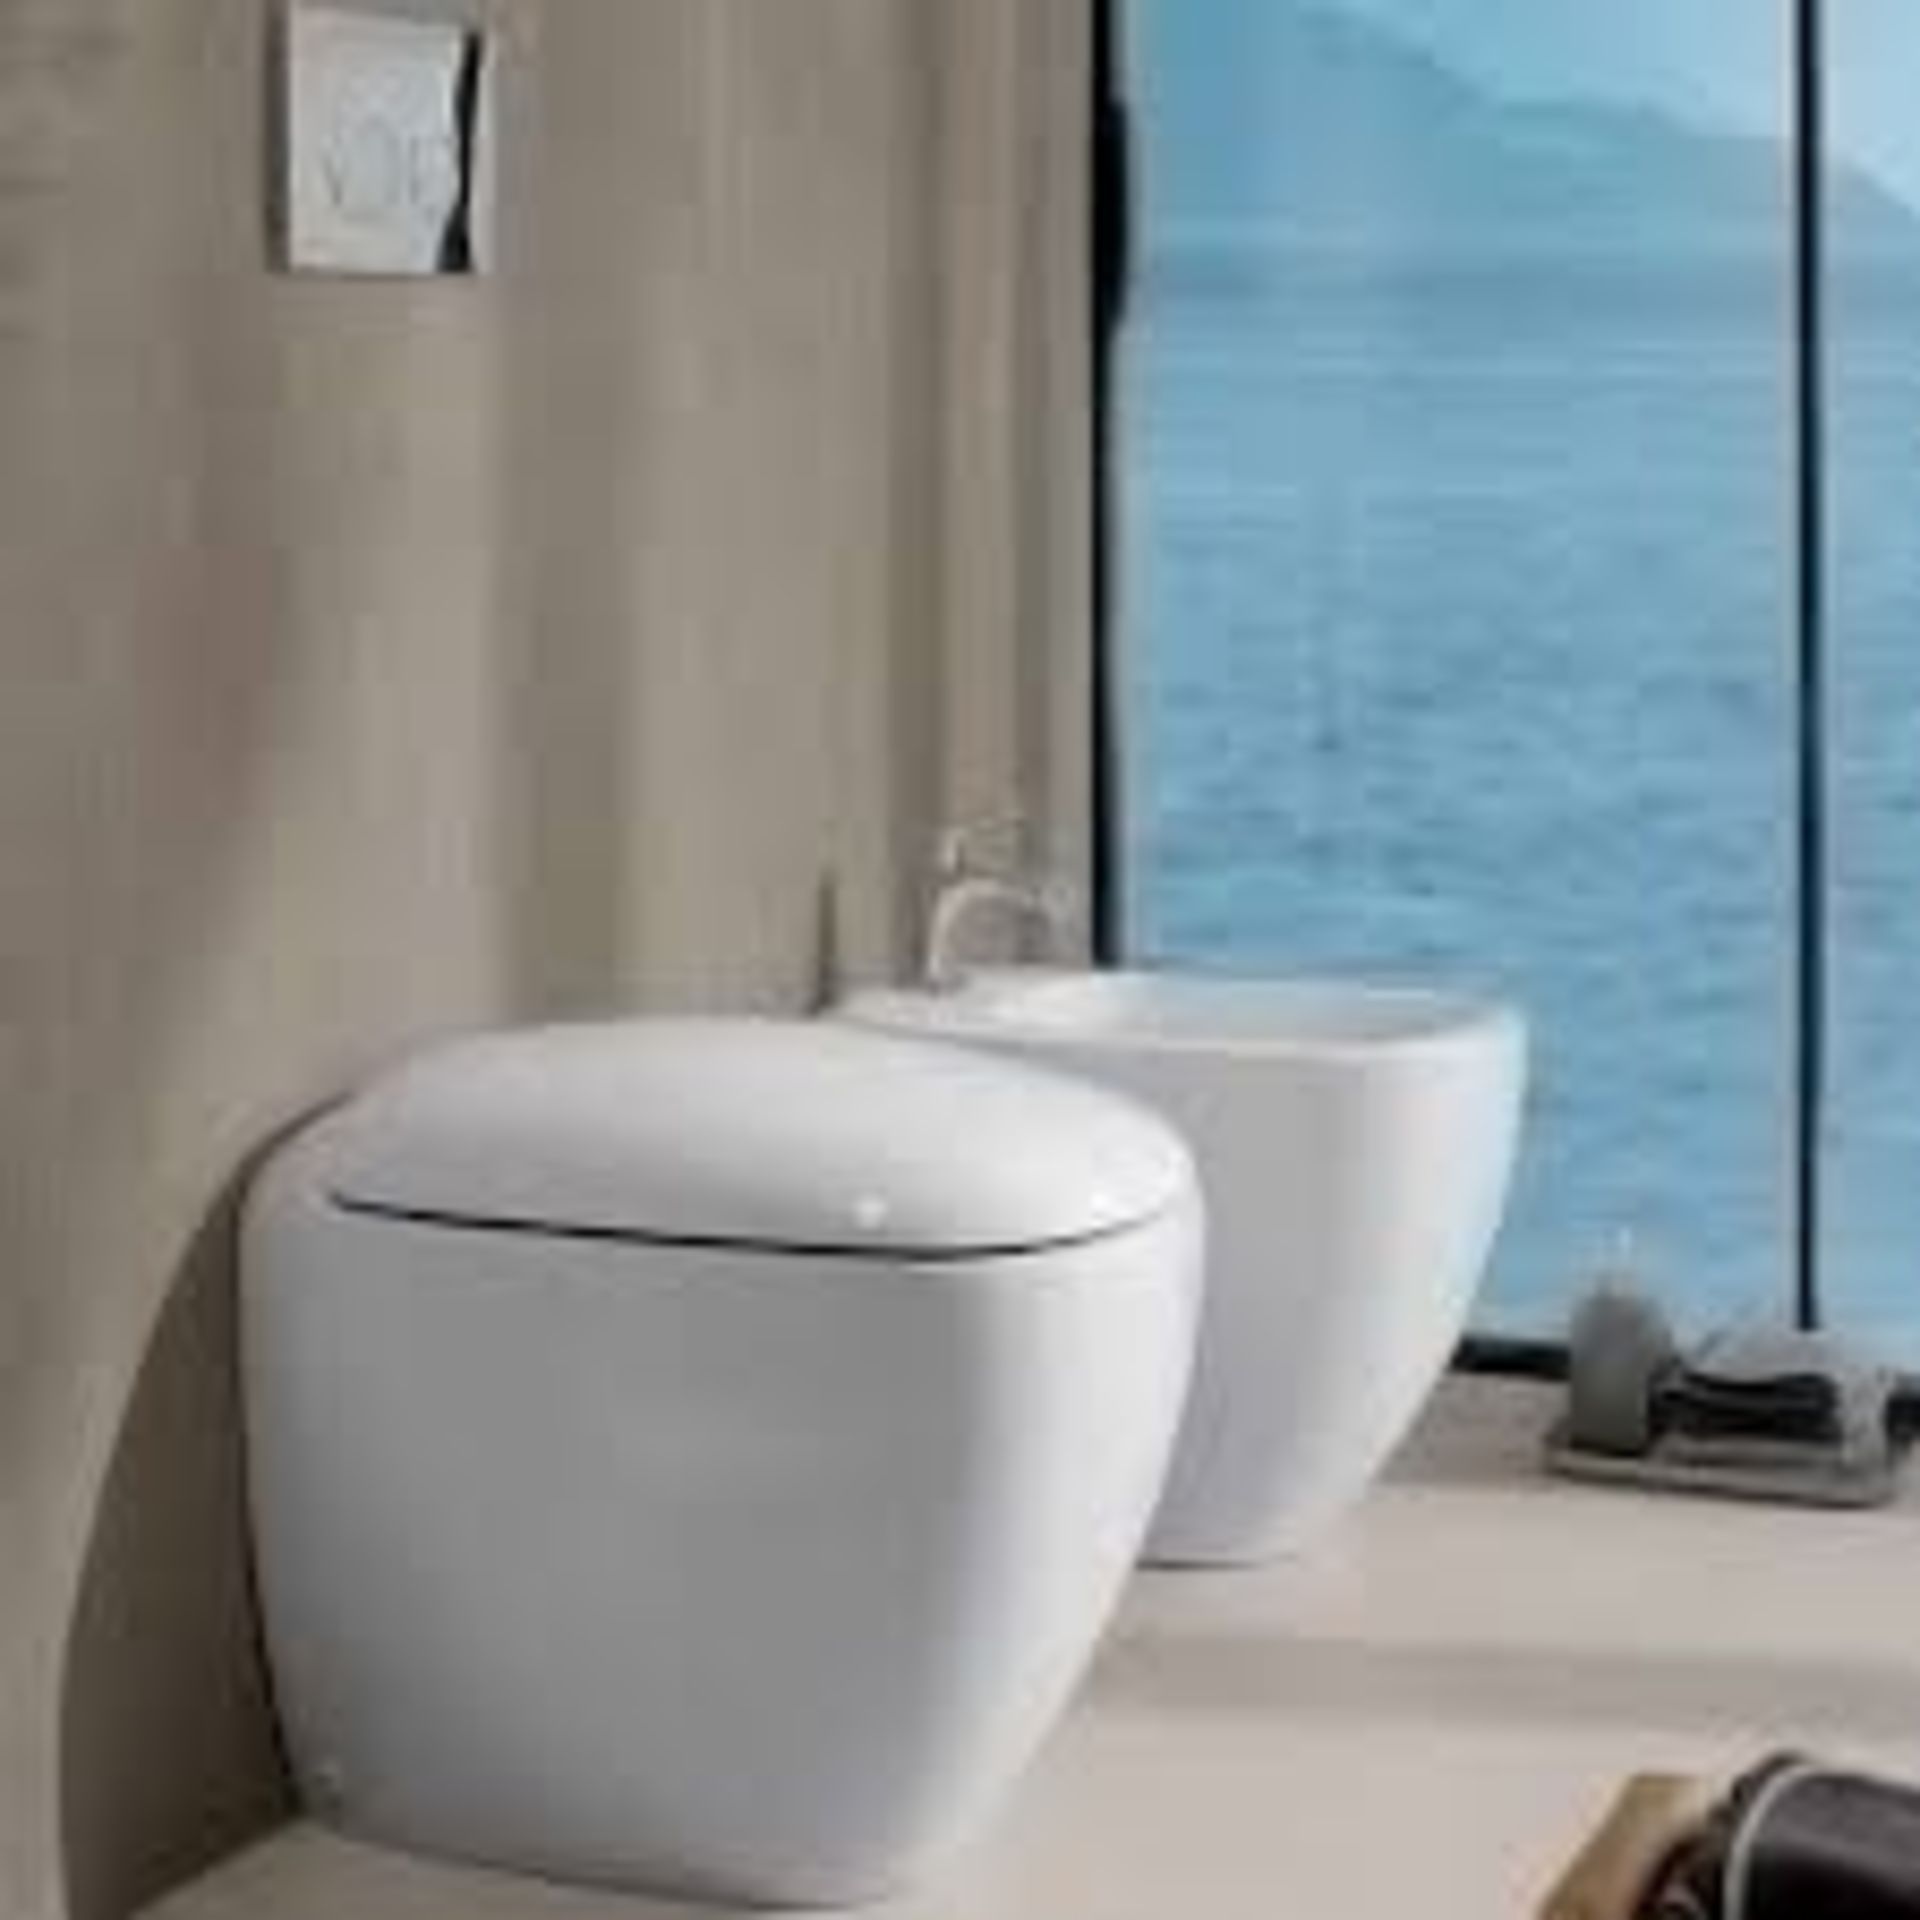 (PC133) Citterio Floor Standing Toilet RRP £427.99.Creates a chic,minimalist look. The Citter...( - Image 2 of 3